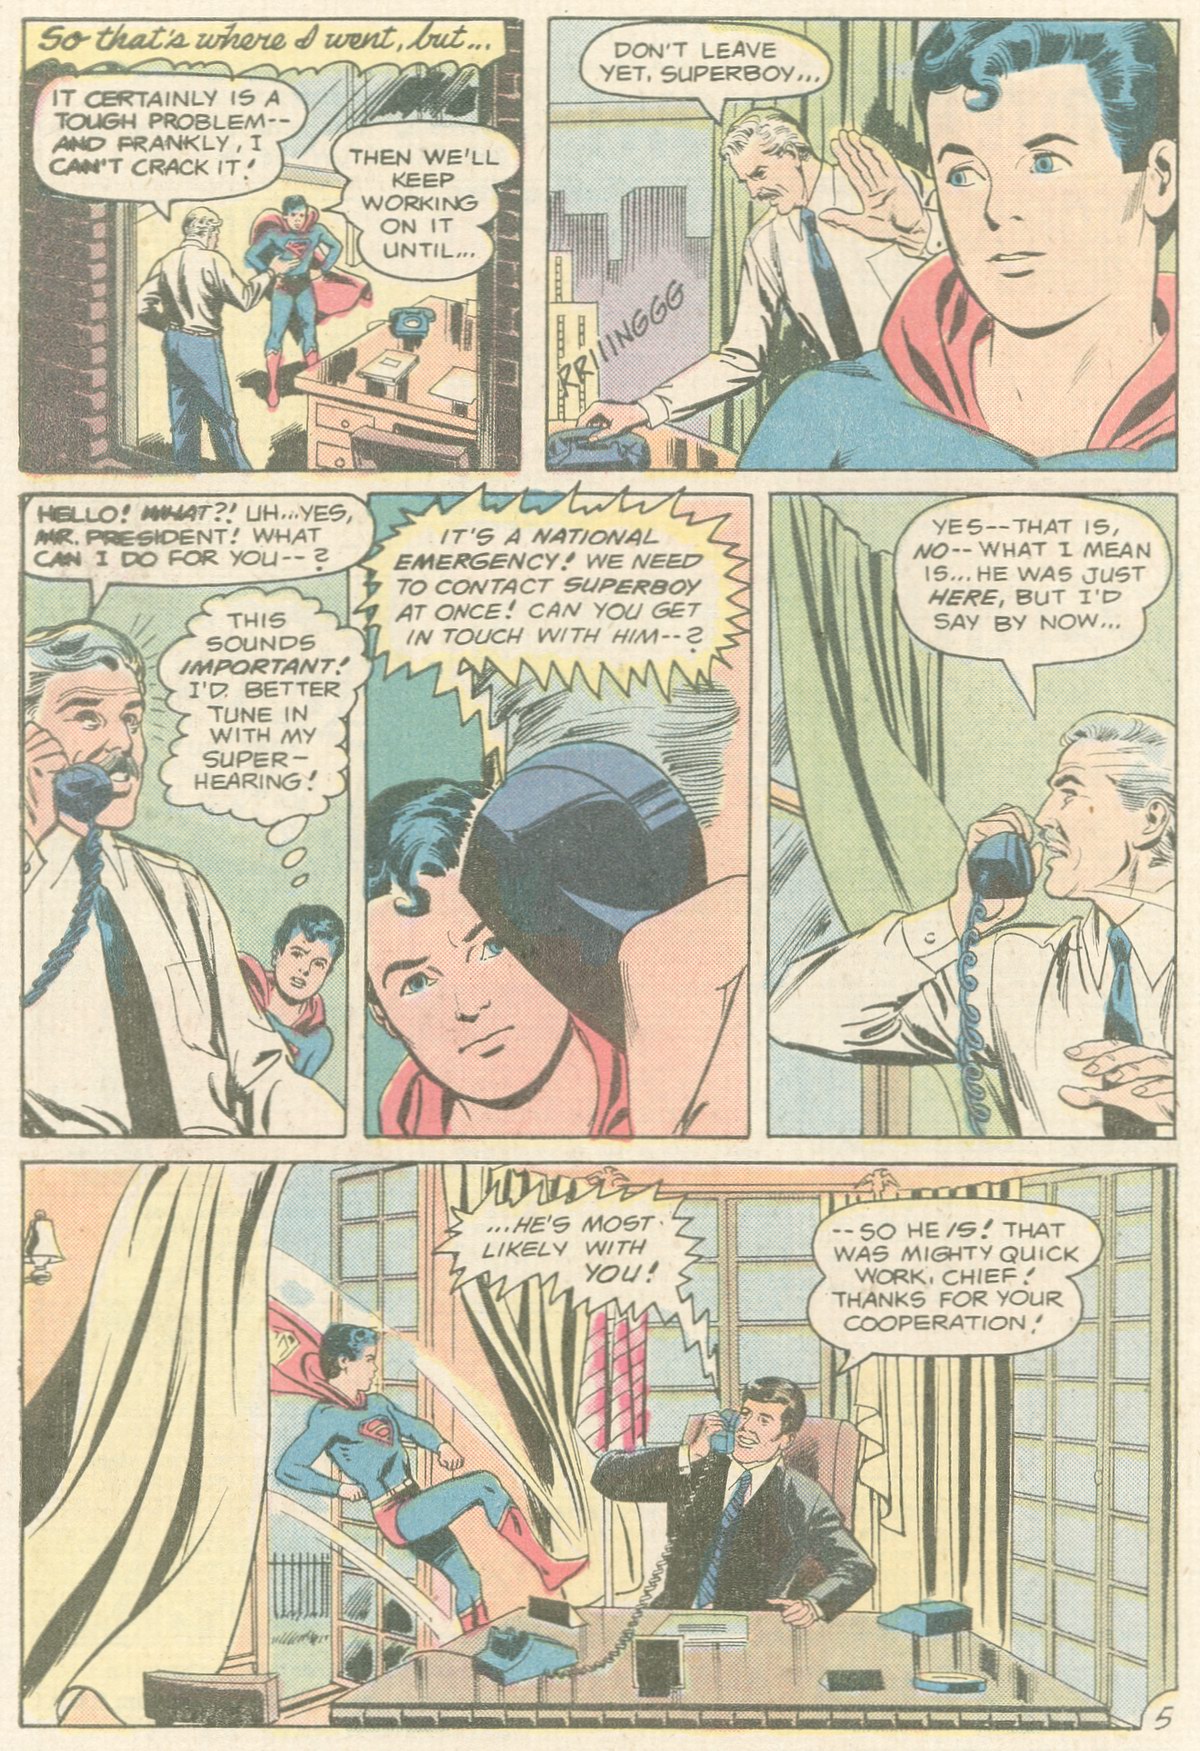 The New Adventures of Superboy 23 Page 24